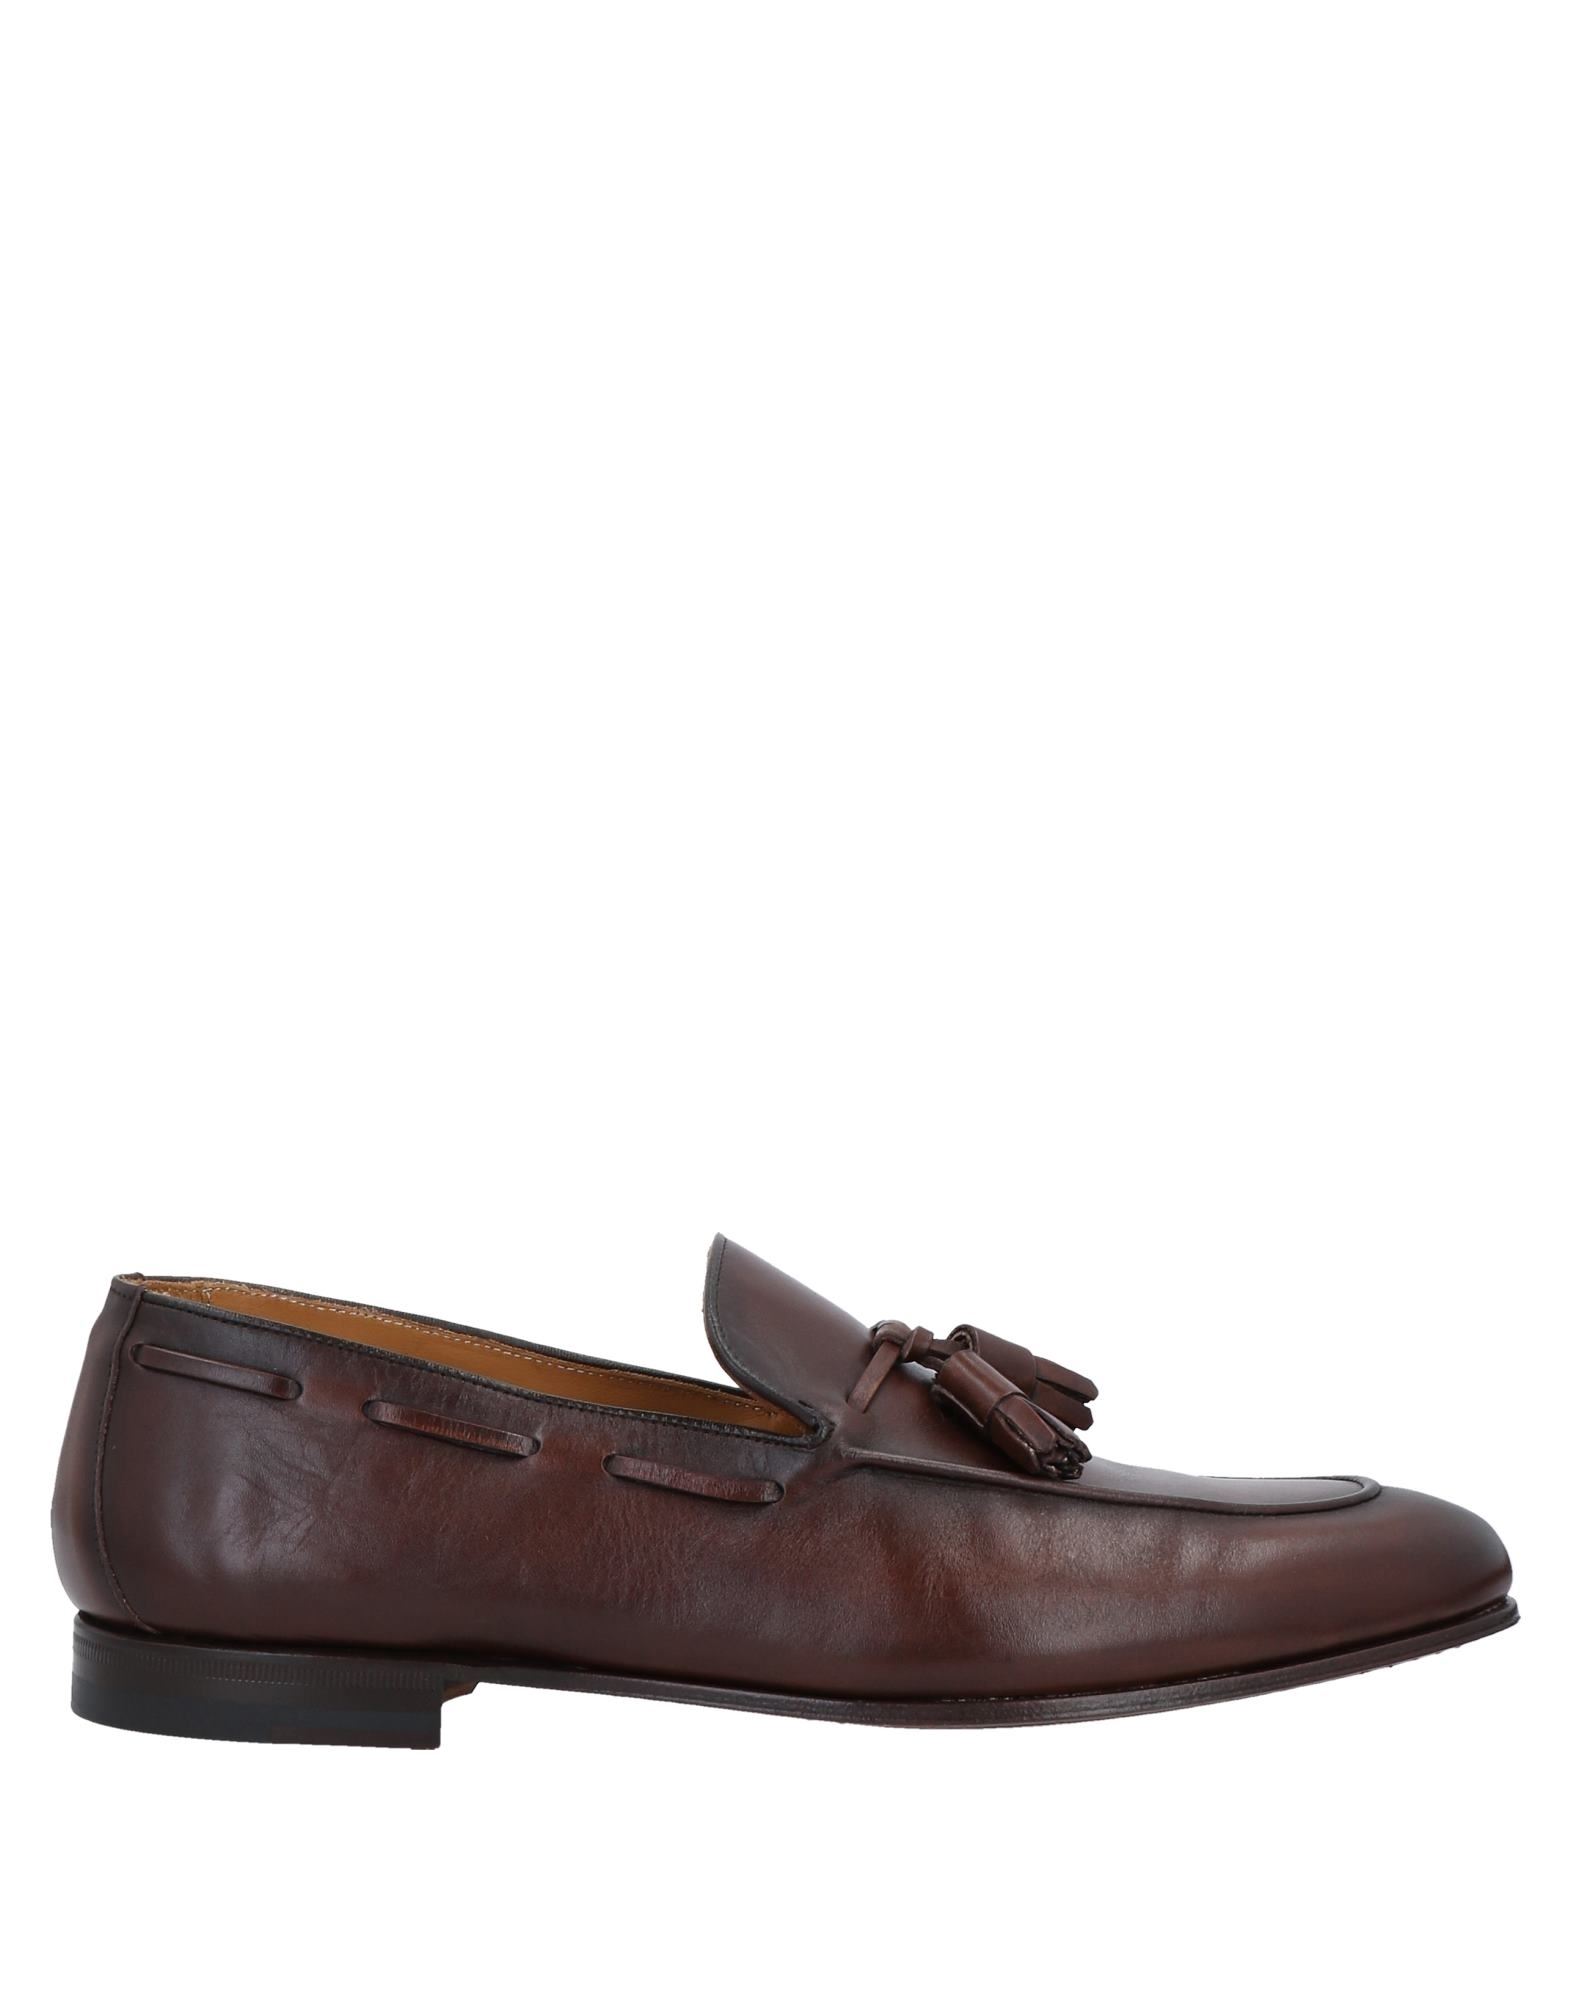 CALCE Loafers